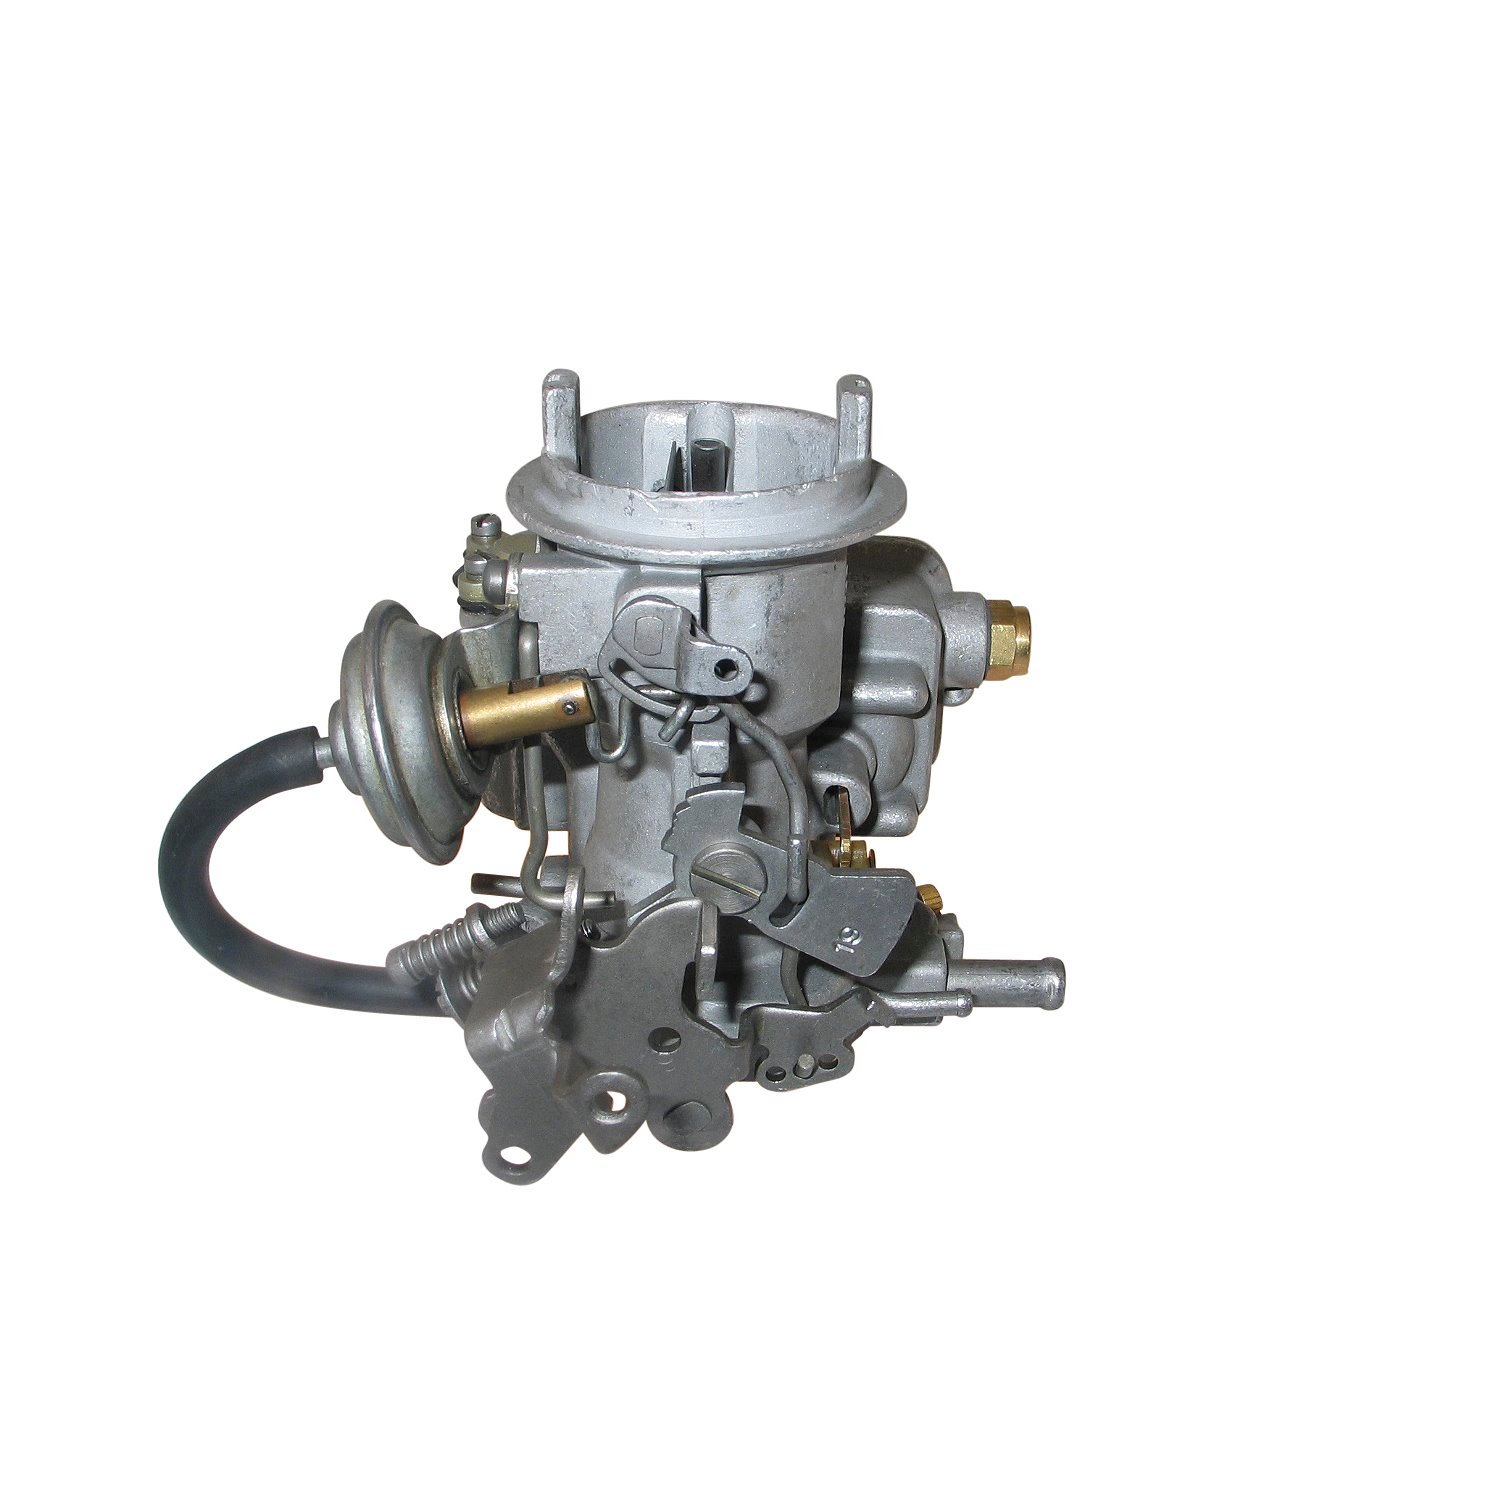 5-5126 Holley Remanufactured Carburetor, 1920-Style